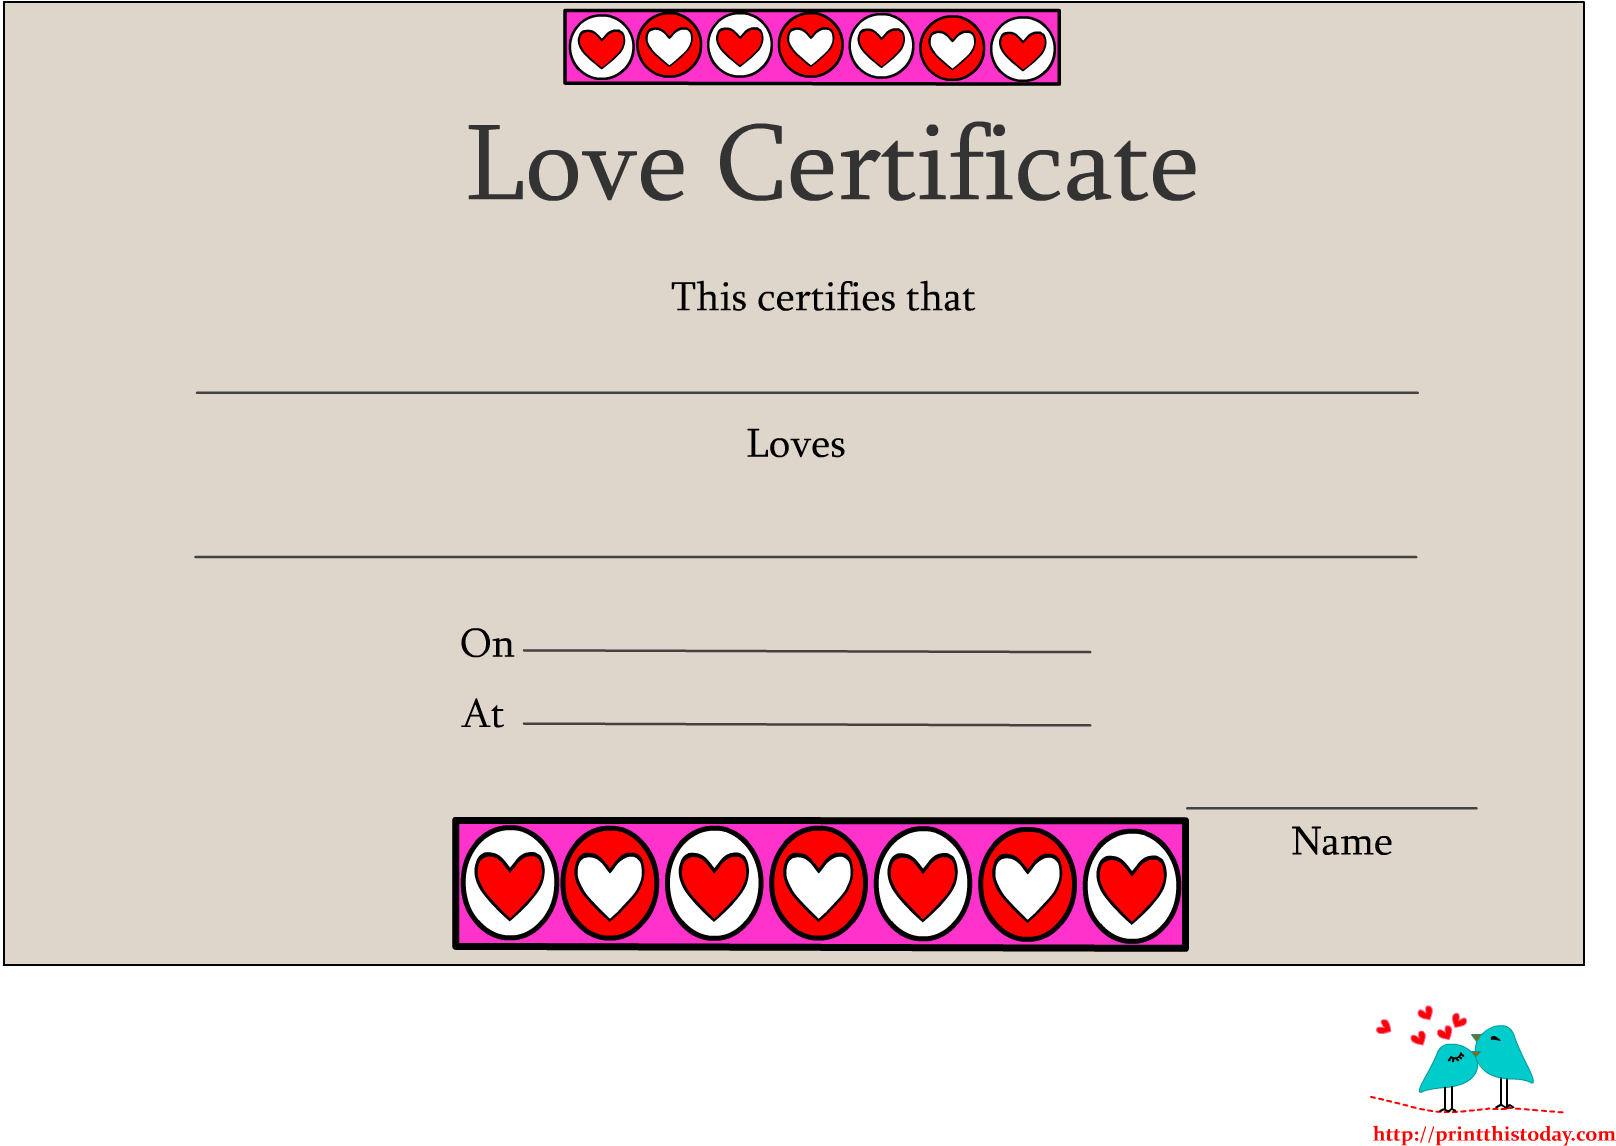 A Certificate With Hearts And Text